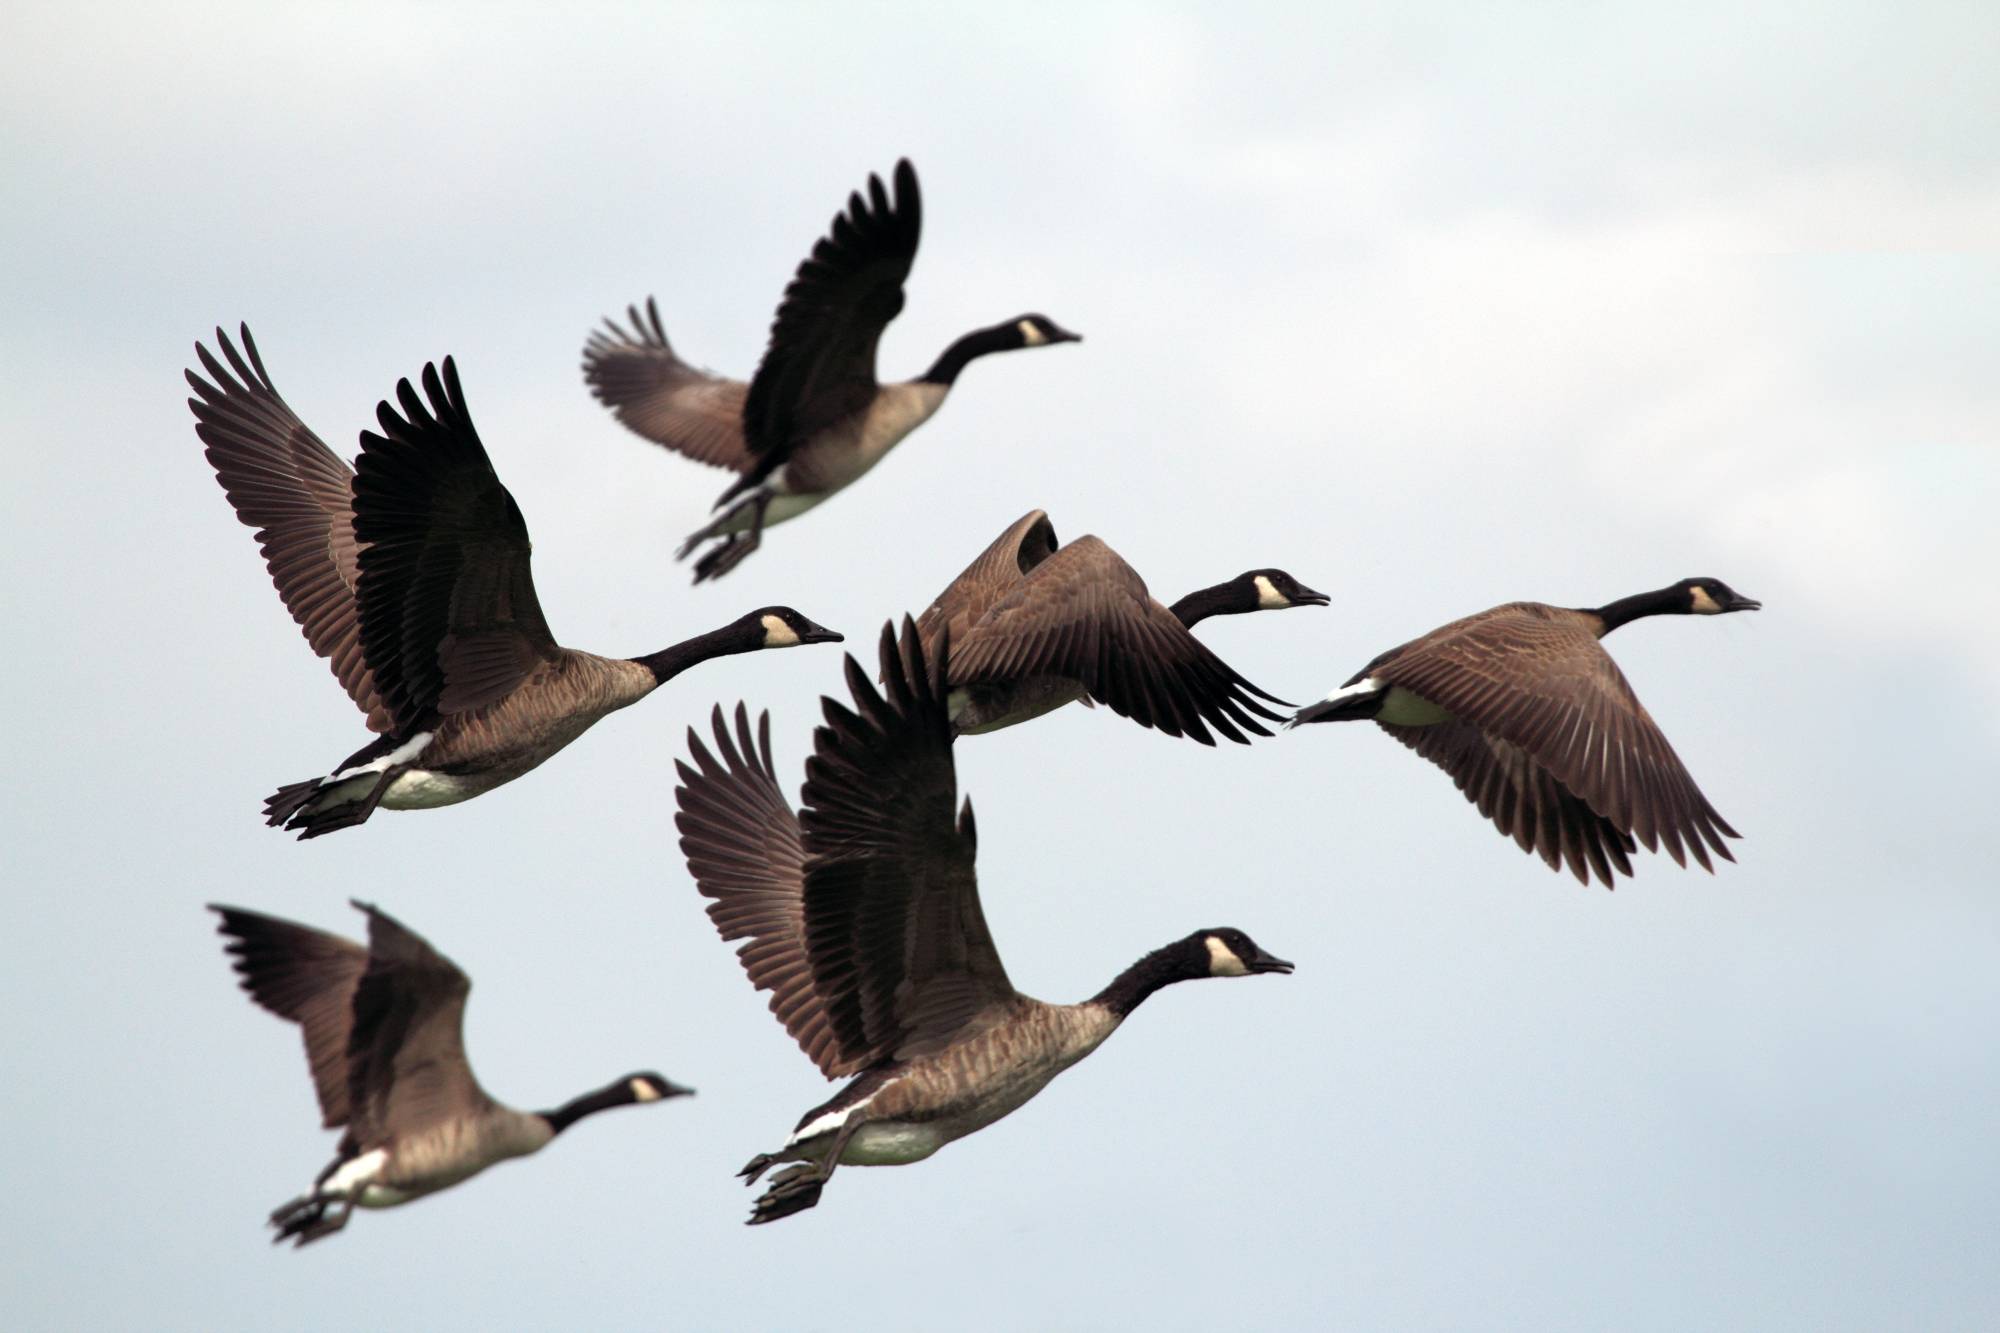 Poetry Picks: 'Wild Geese' by Mary Oliver | Anythink Libraries